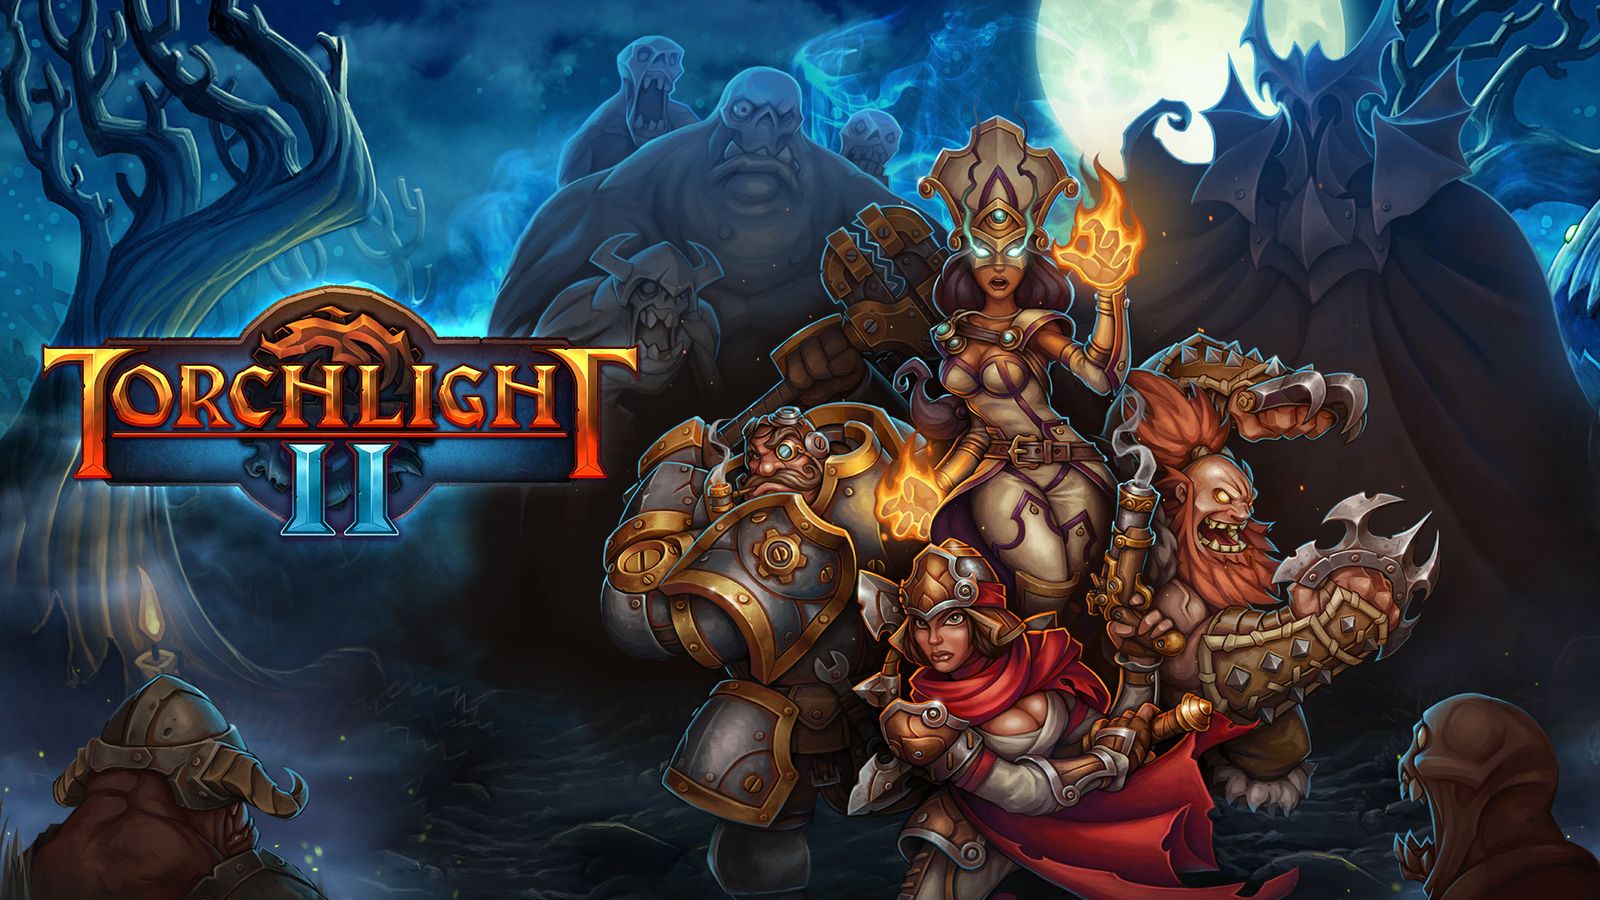 FREE: Torchlight II is the free game given away by Epic Games today.